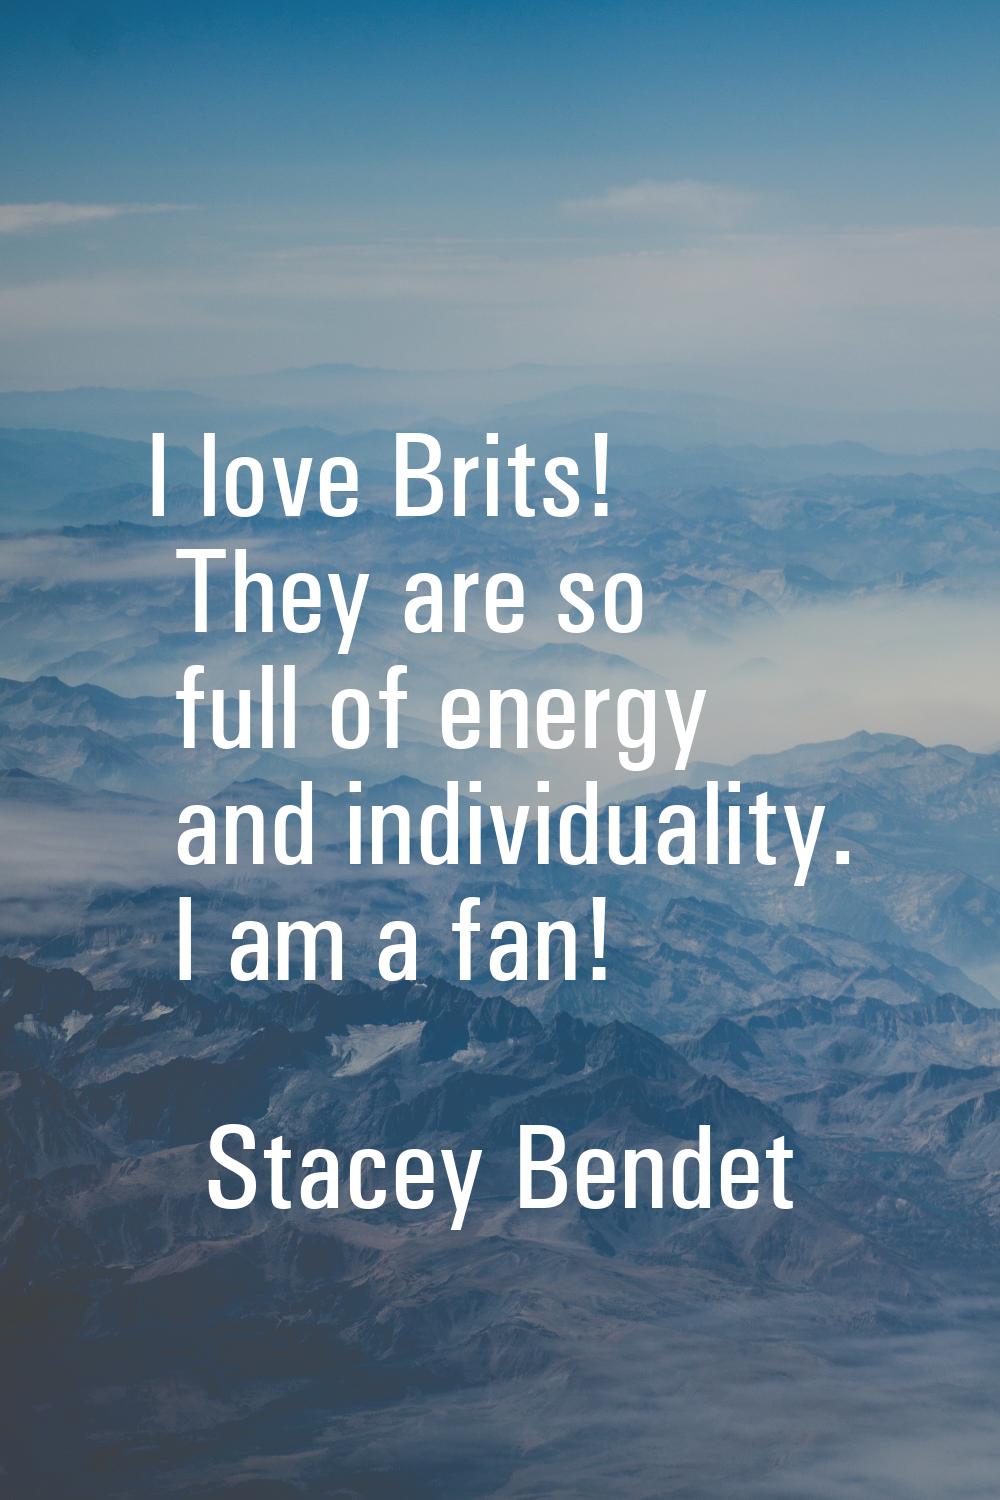 I love Brits! They are so full of energy and individuality. I am a fan!